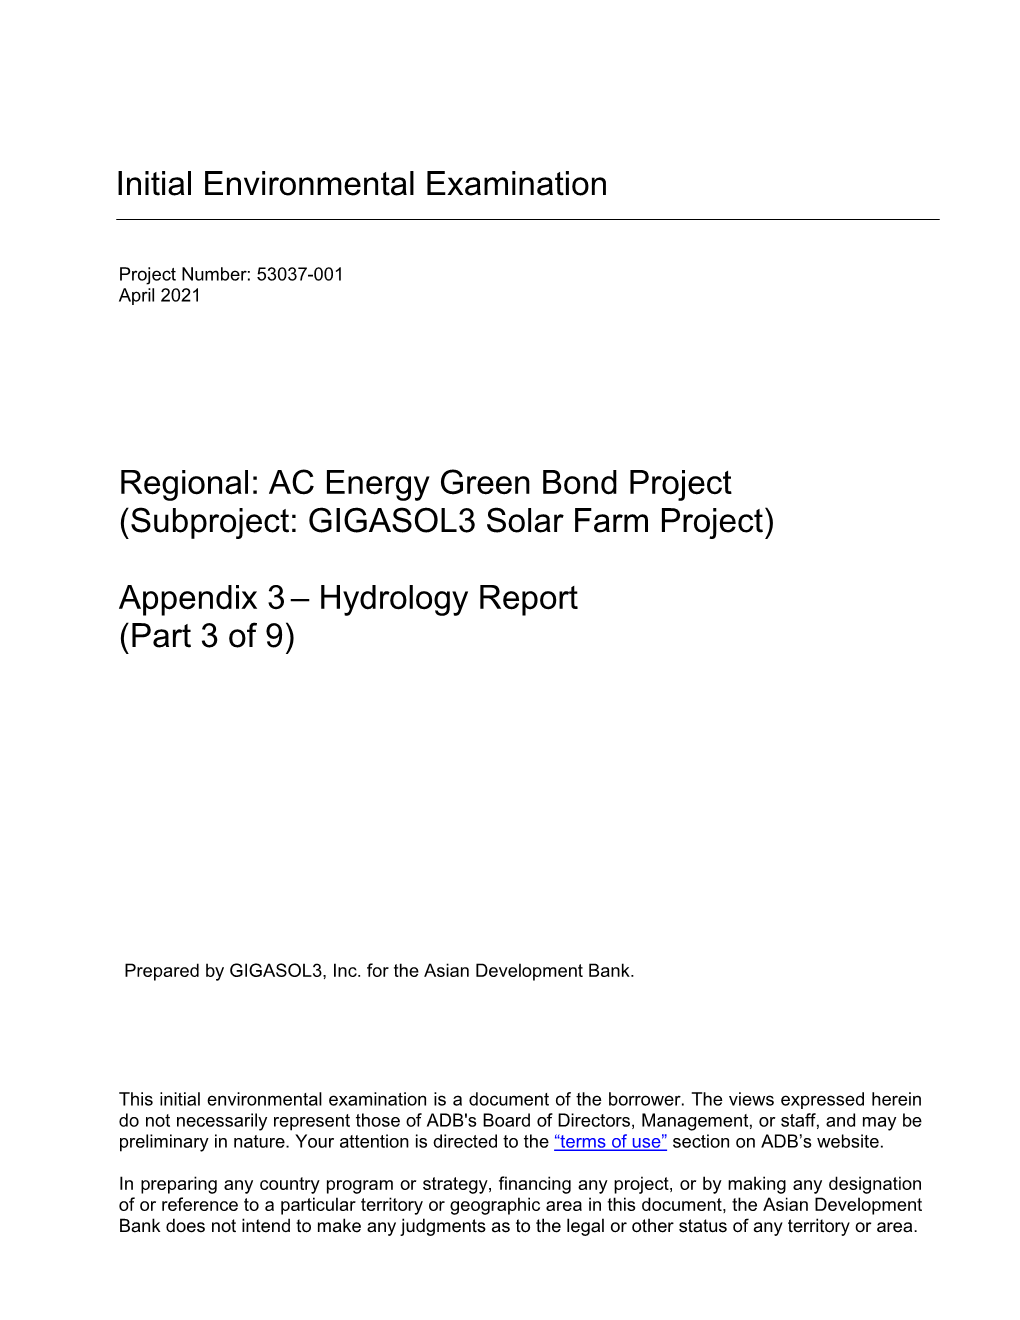 Appendix 3 – Hydrology Report (Part 3 of 9)